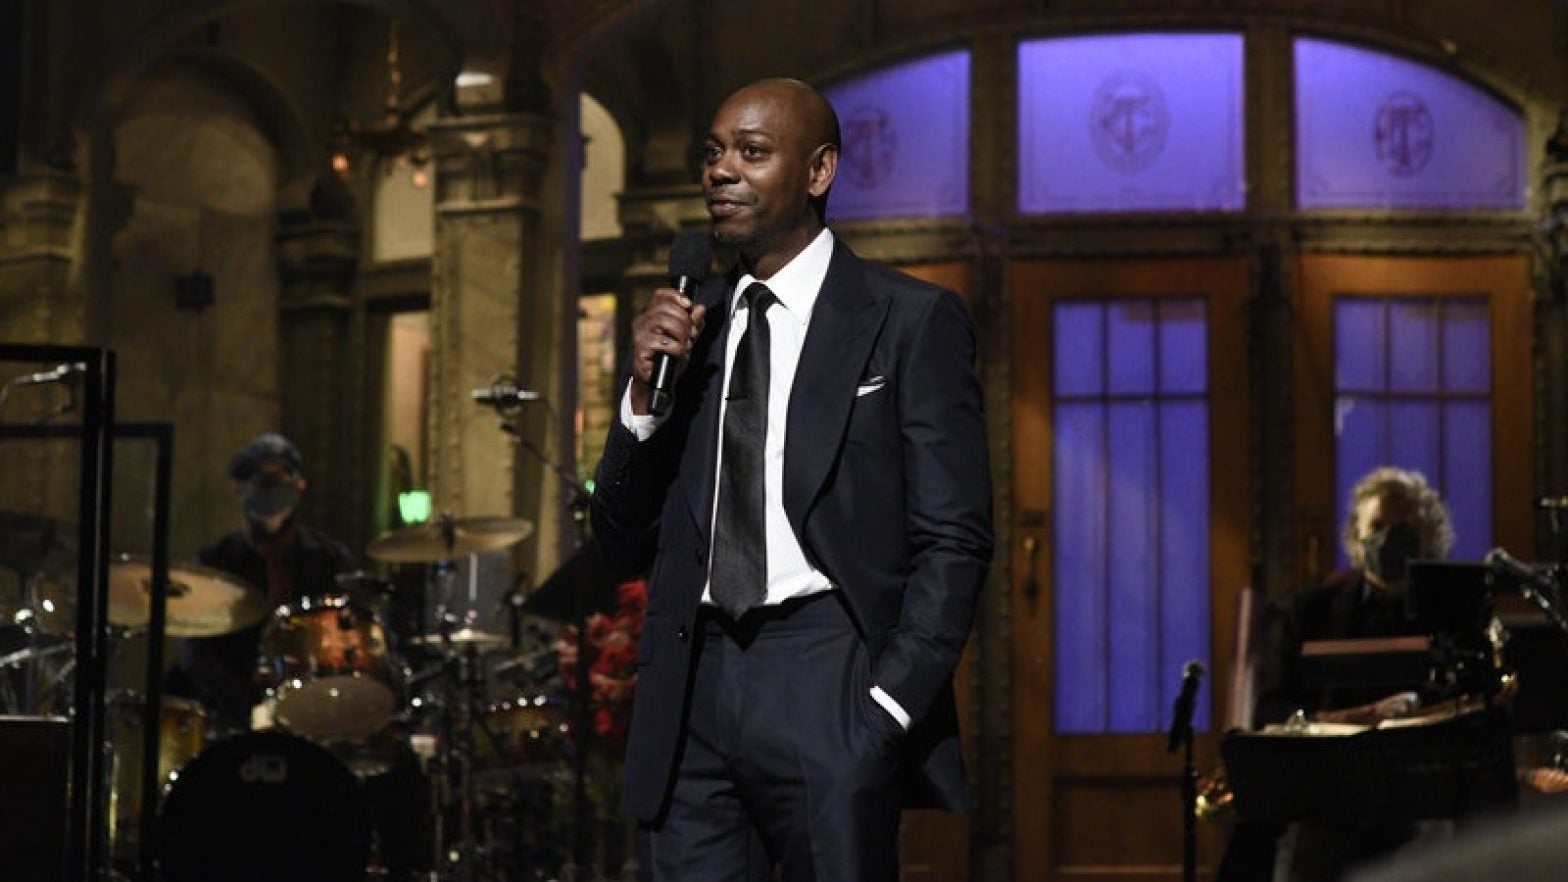 Dave Chappelle Sounds The Racial Alarm With His 'Saturday Night Live' Post-Election Monologue